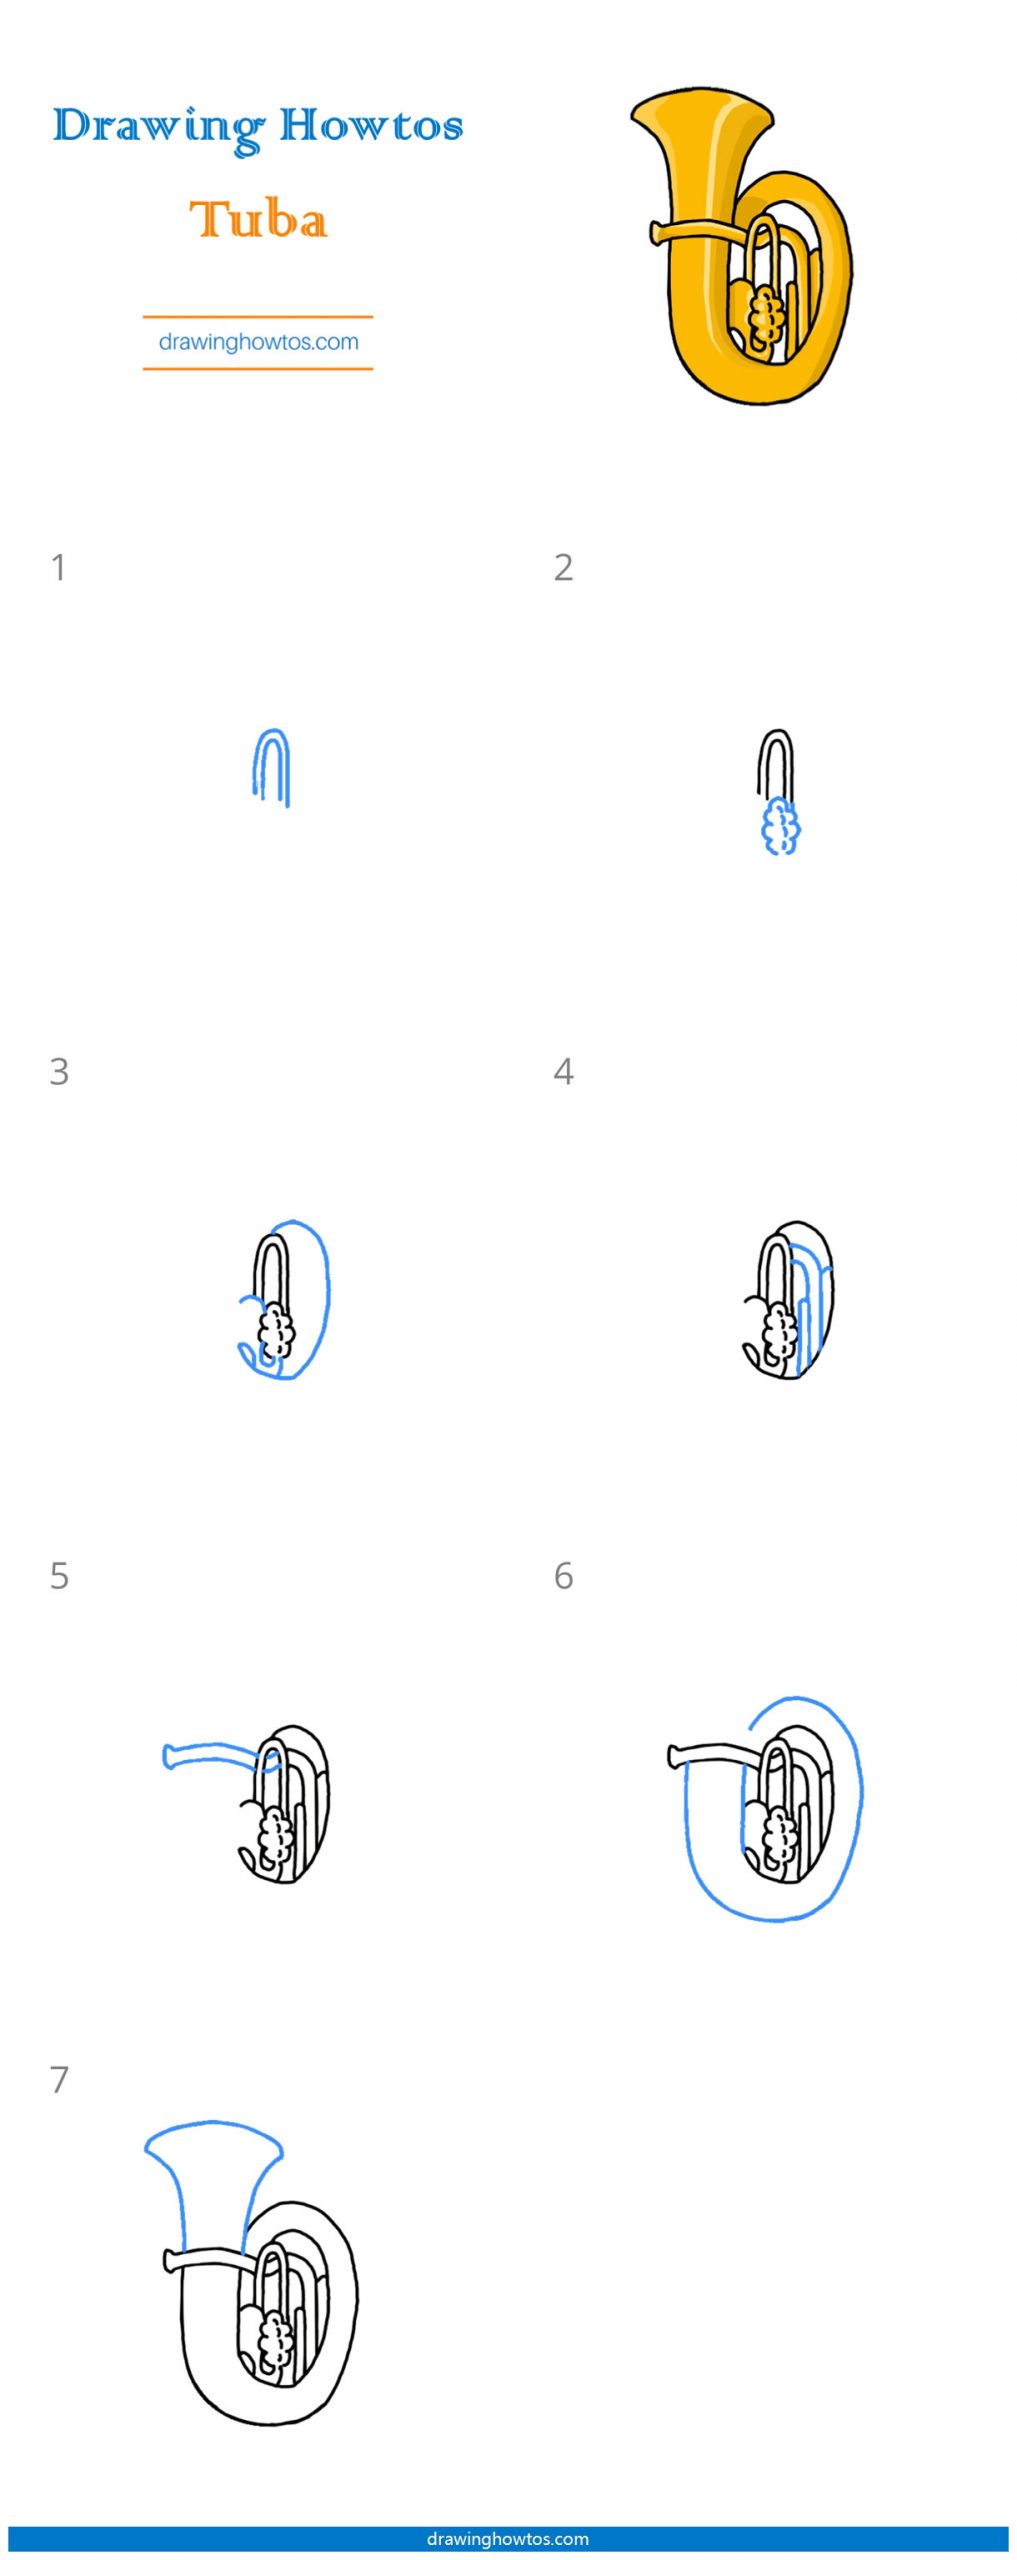 How to Draw a Tuba Step by Step